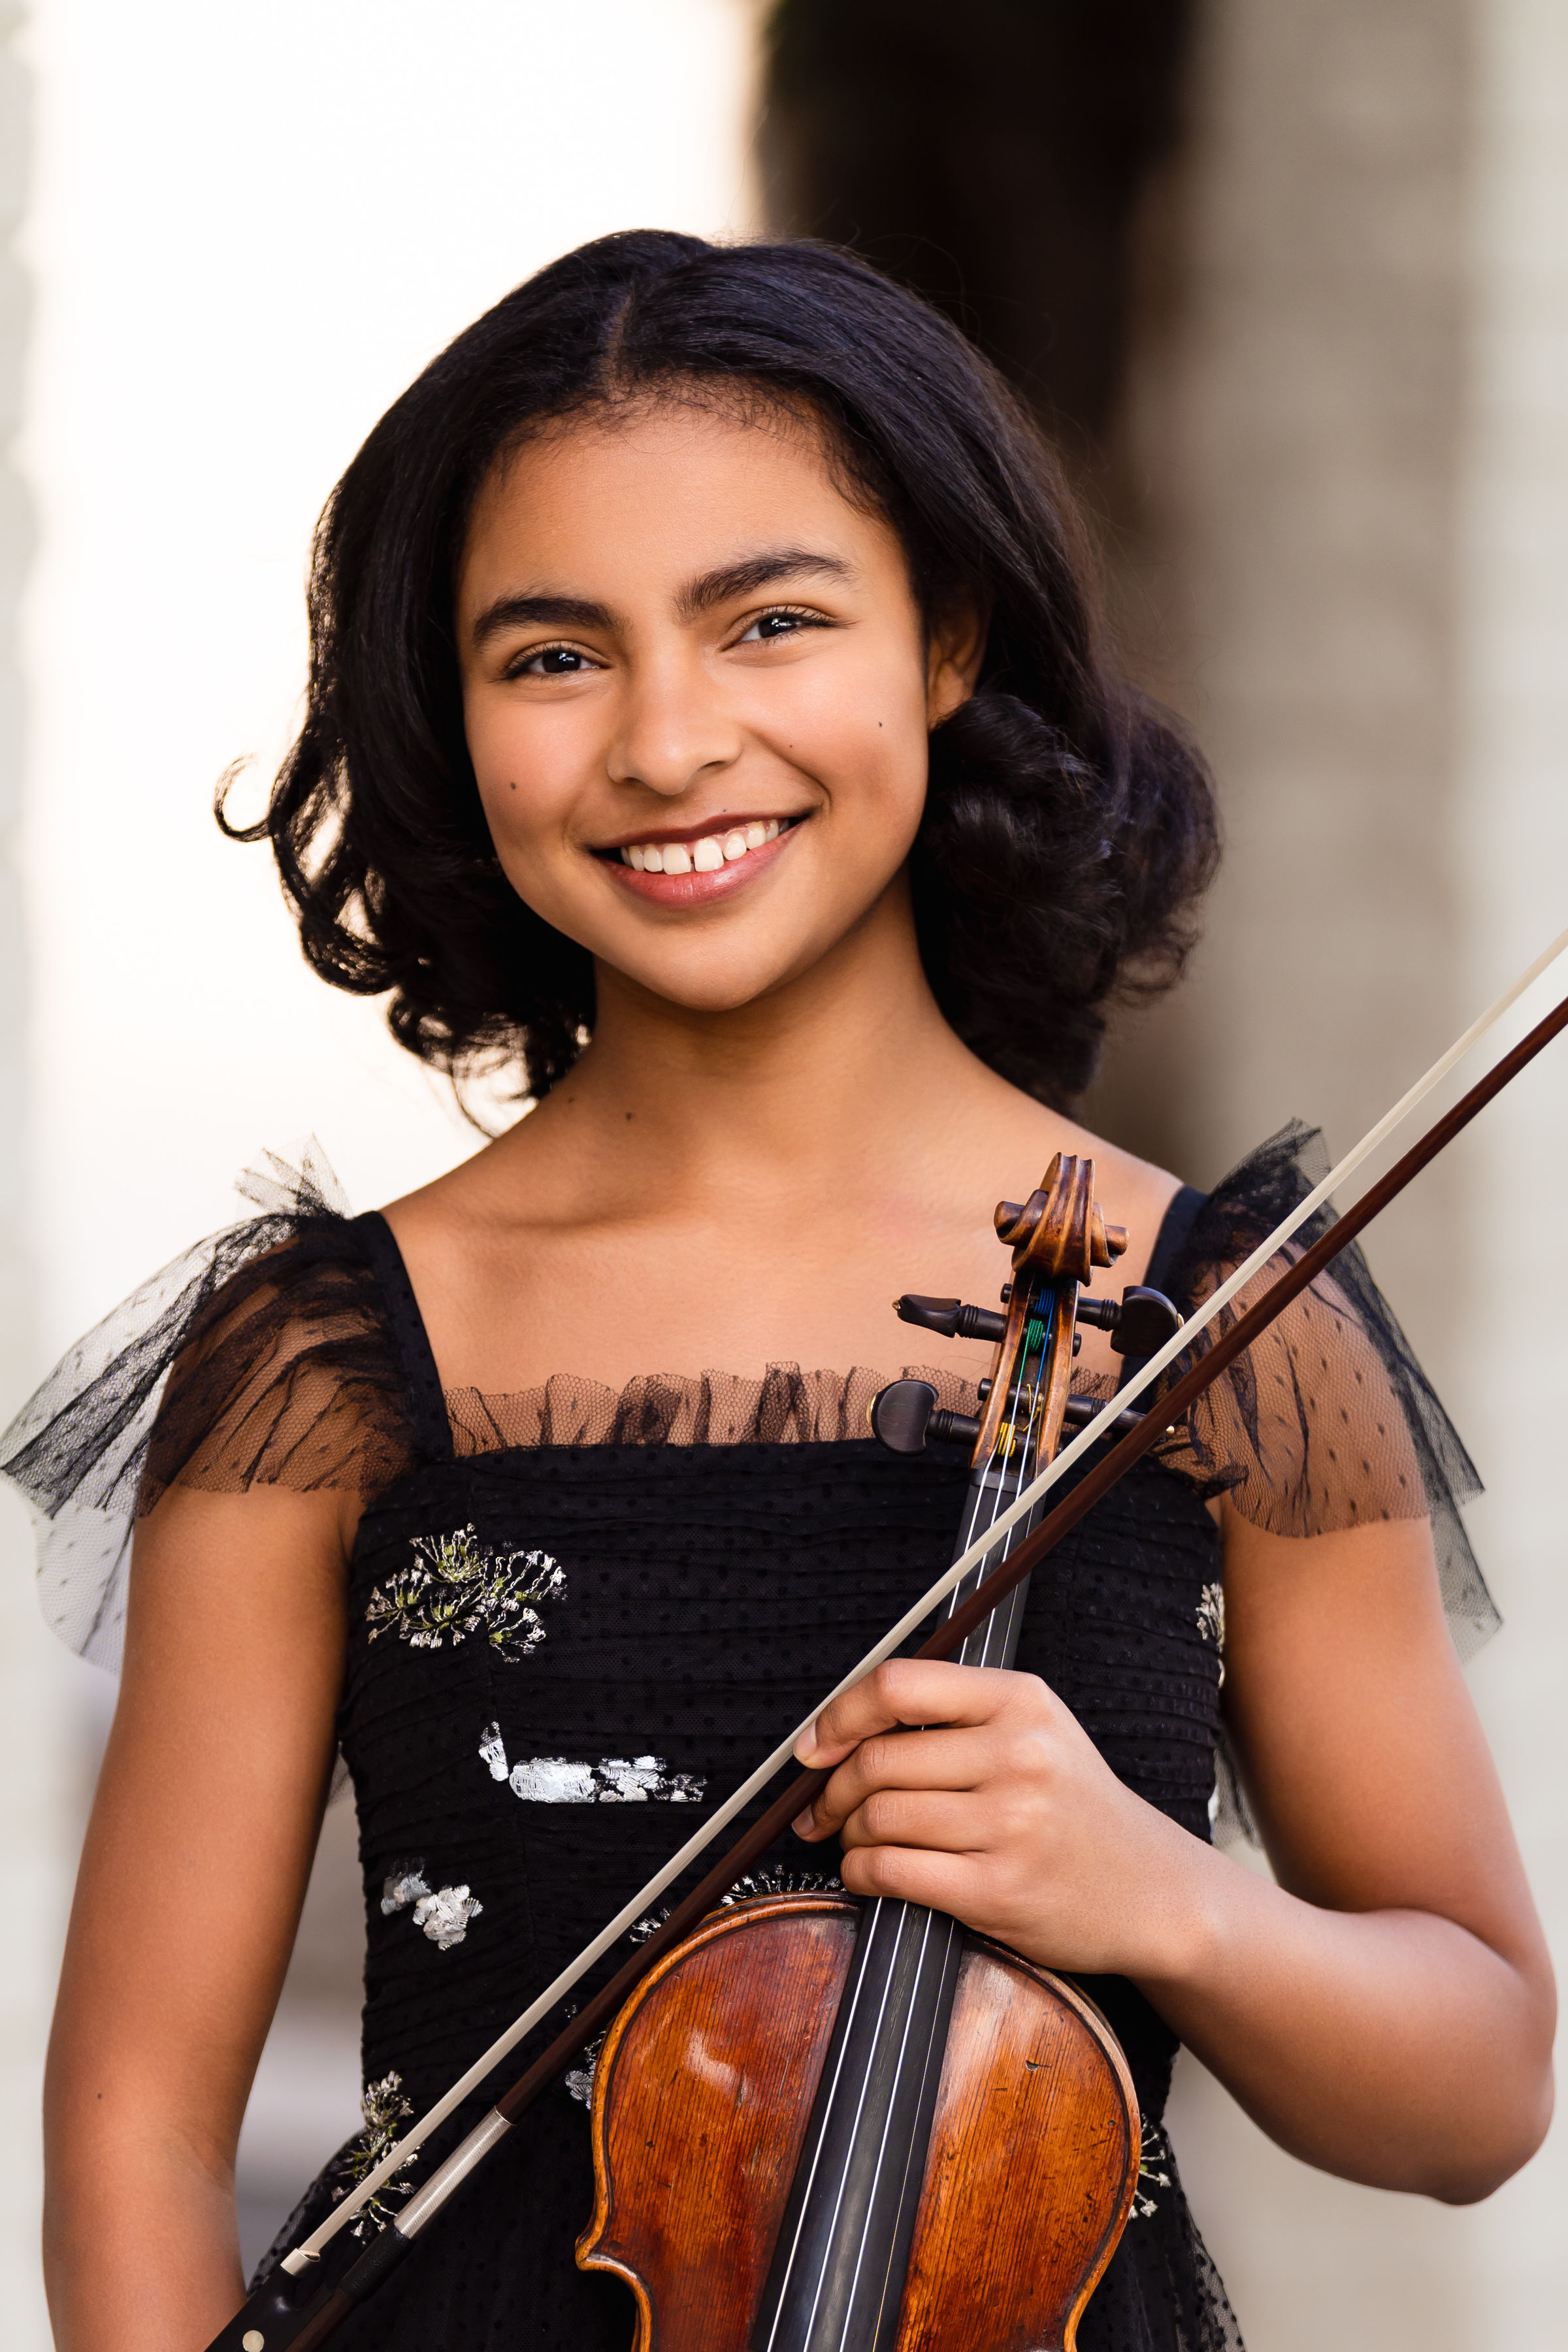 Young woman smiling in a black dress holding her violin